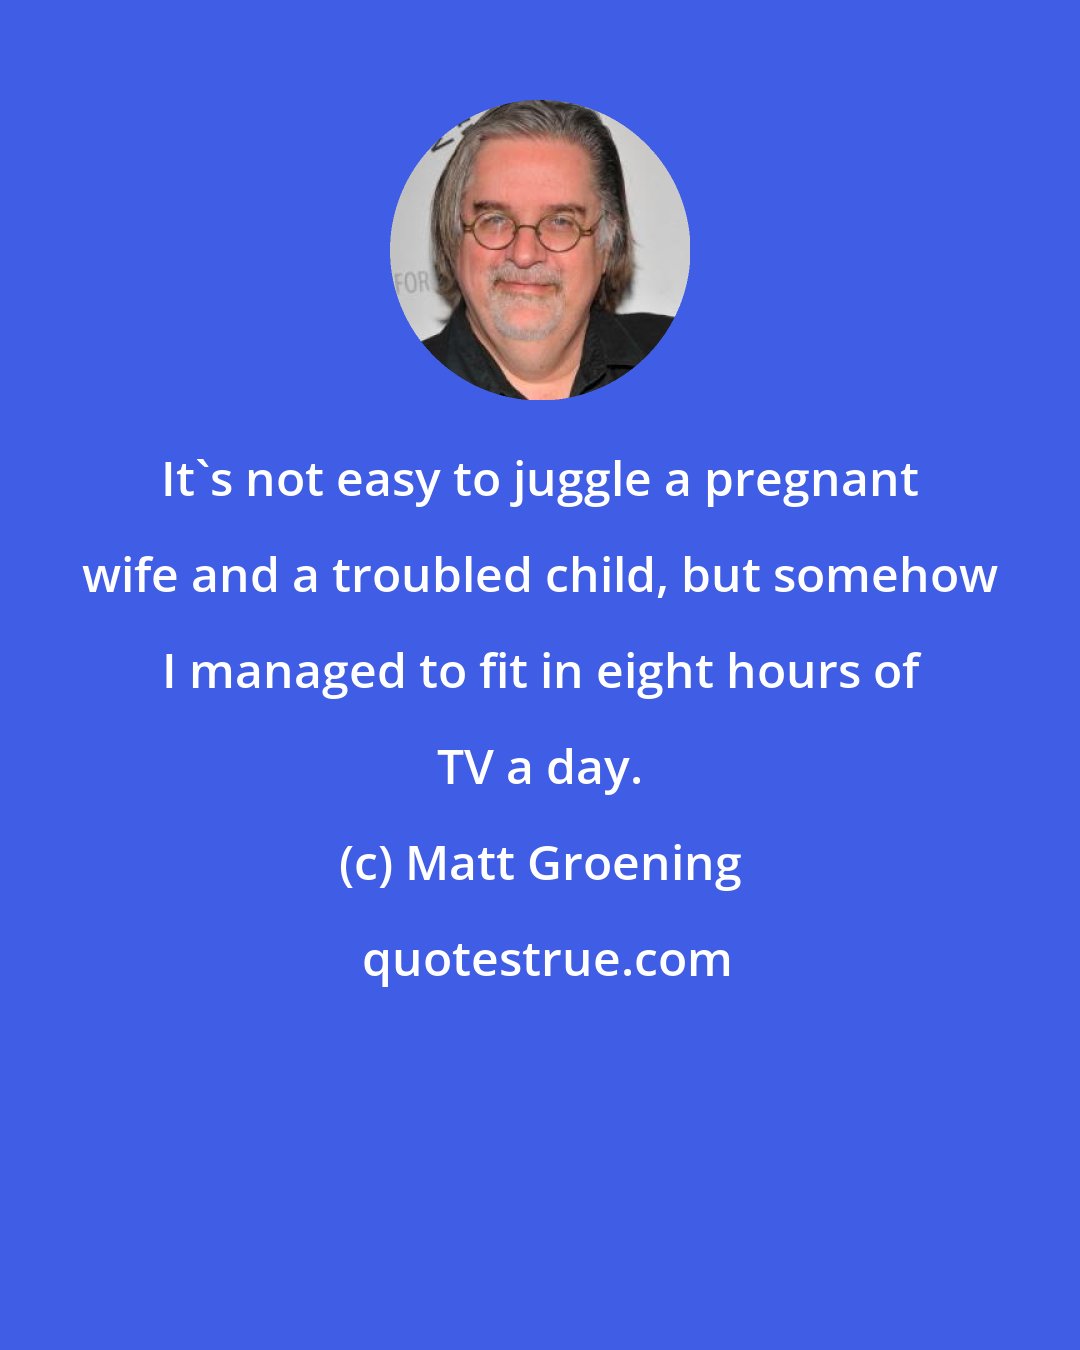 Matt Groening: It's not easy to juggle a pregnant wife and a troubled child, but somehow I managed to fit in eight hours of TV a day.